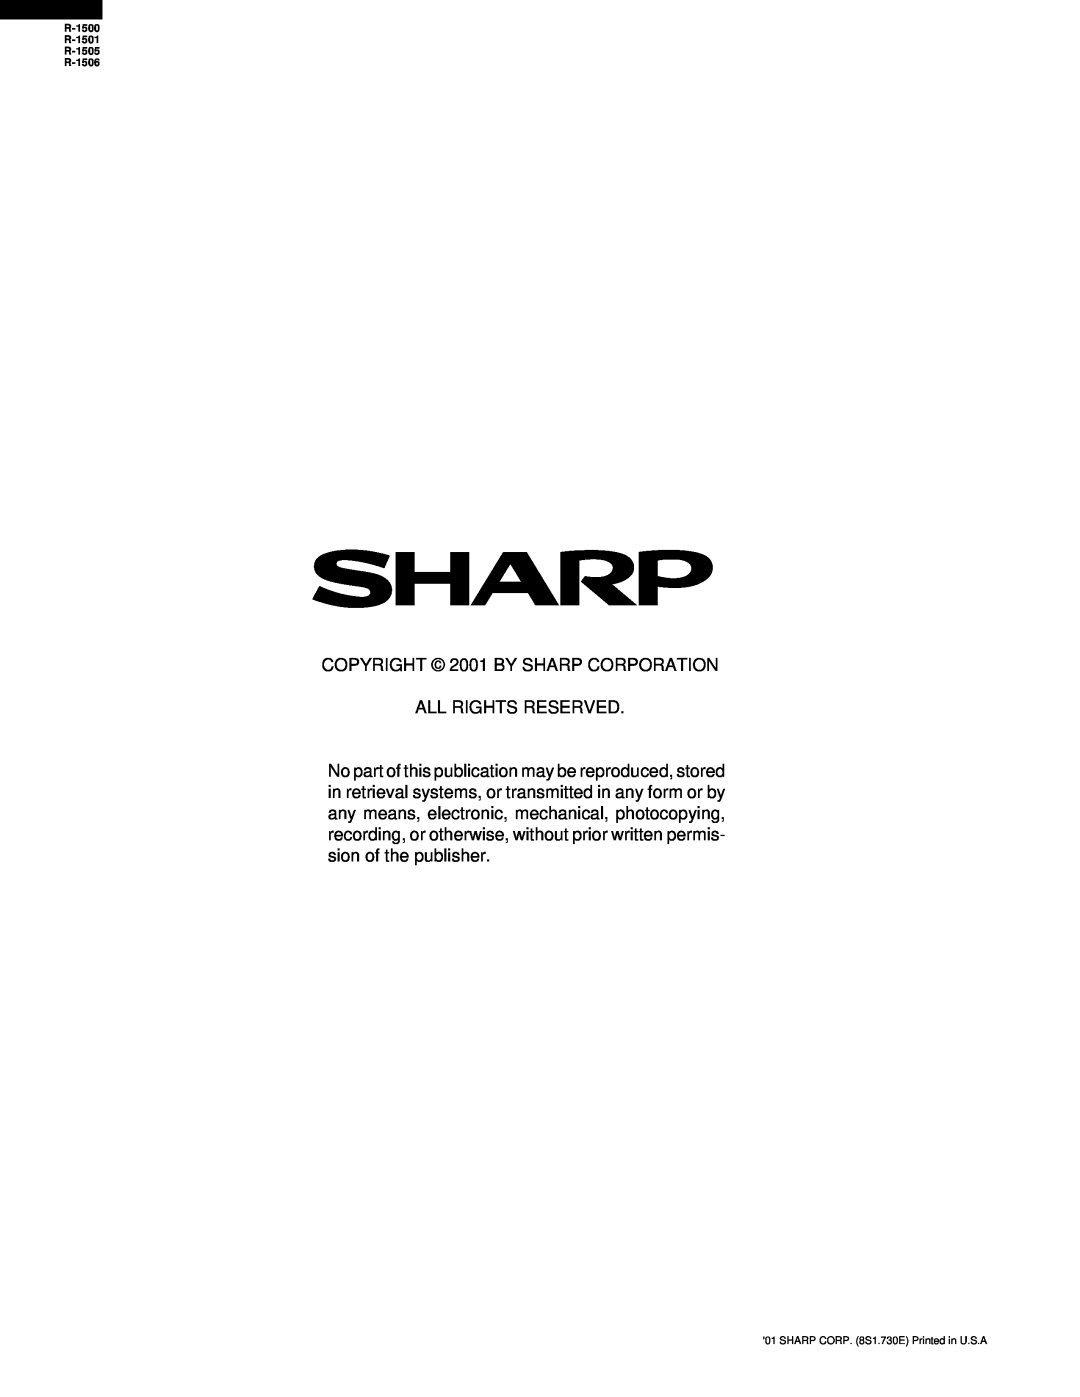 Sharp service manual COPYRIGHT 2001 BY SHARP CORPORATION ALL RIGHTS RESERVED, R-1500 R-1501 R-1505 R-1506 